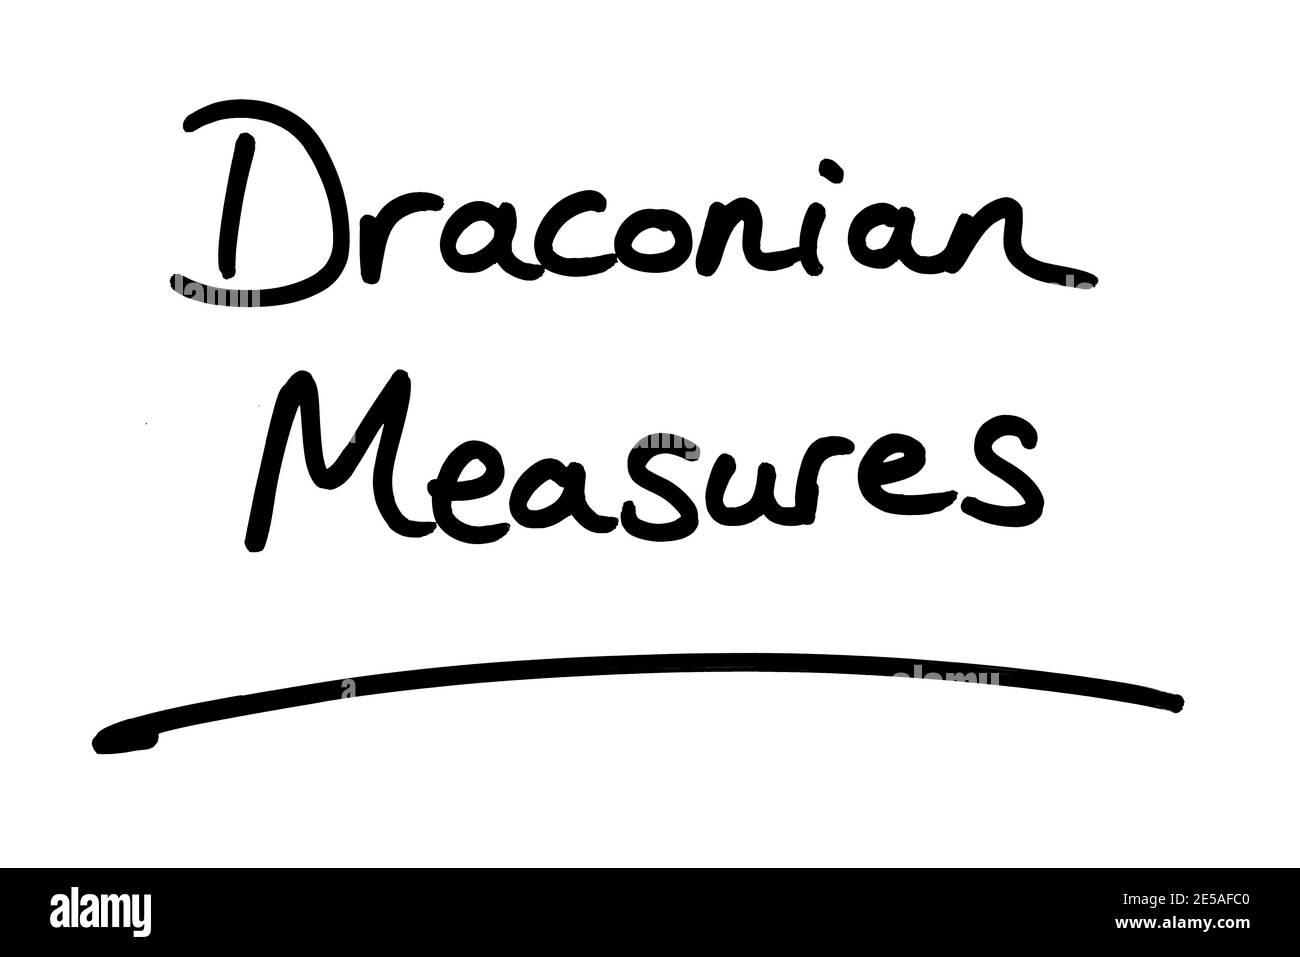 Draconian Measures, handwritten on a white background. Stock Photo